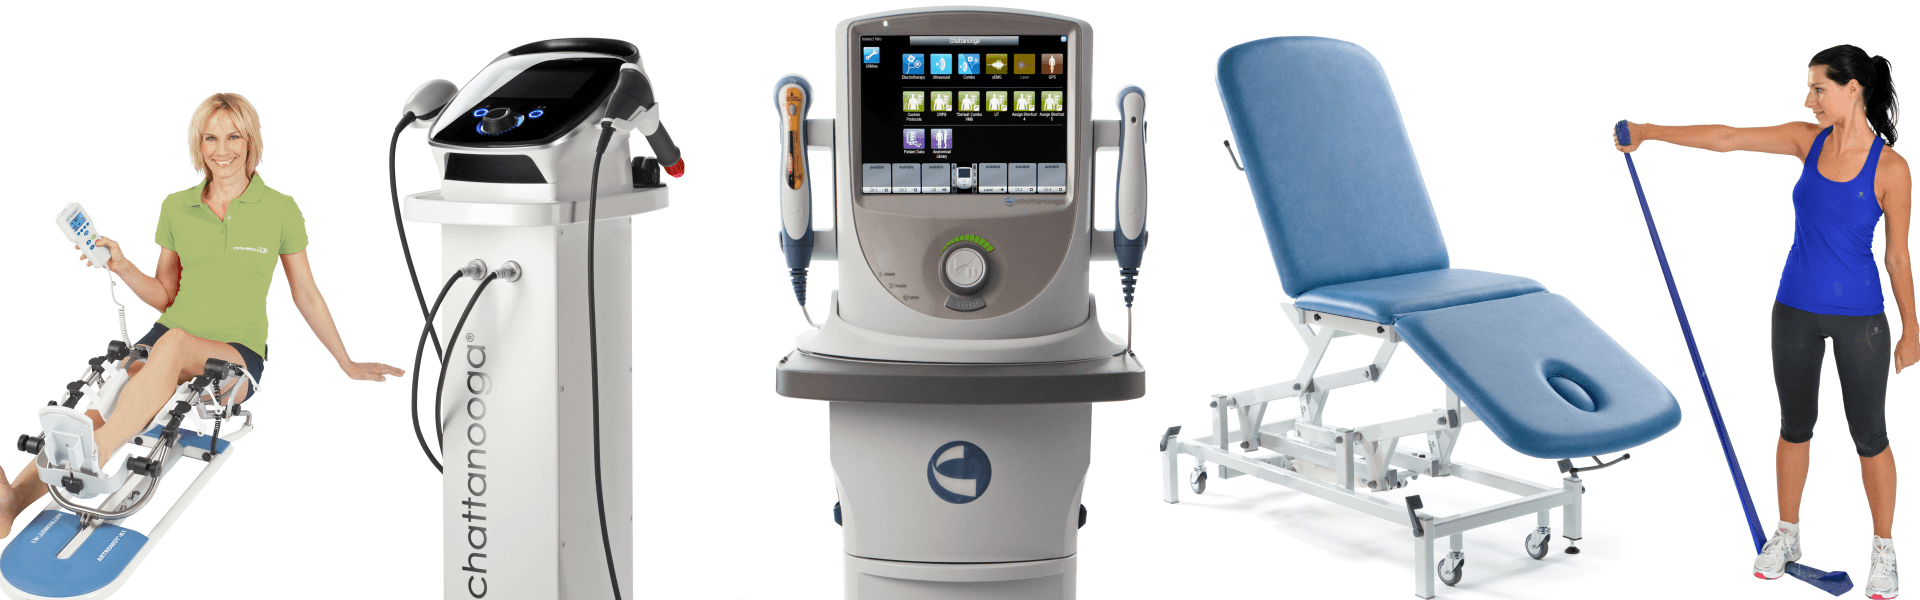 Physiotherapy Equipment – EME Services Ltd